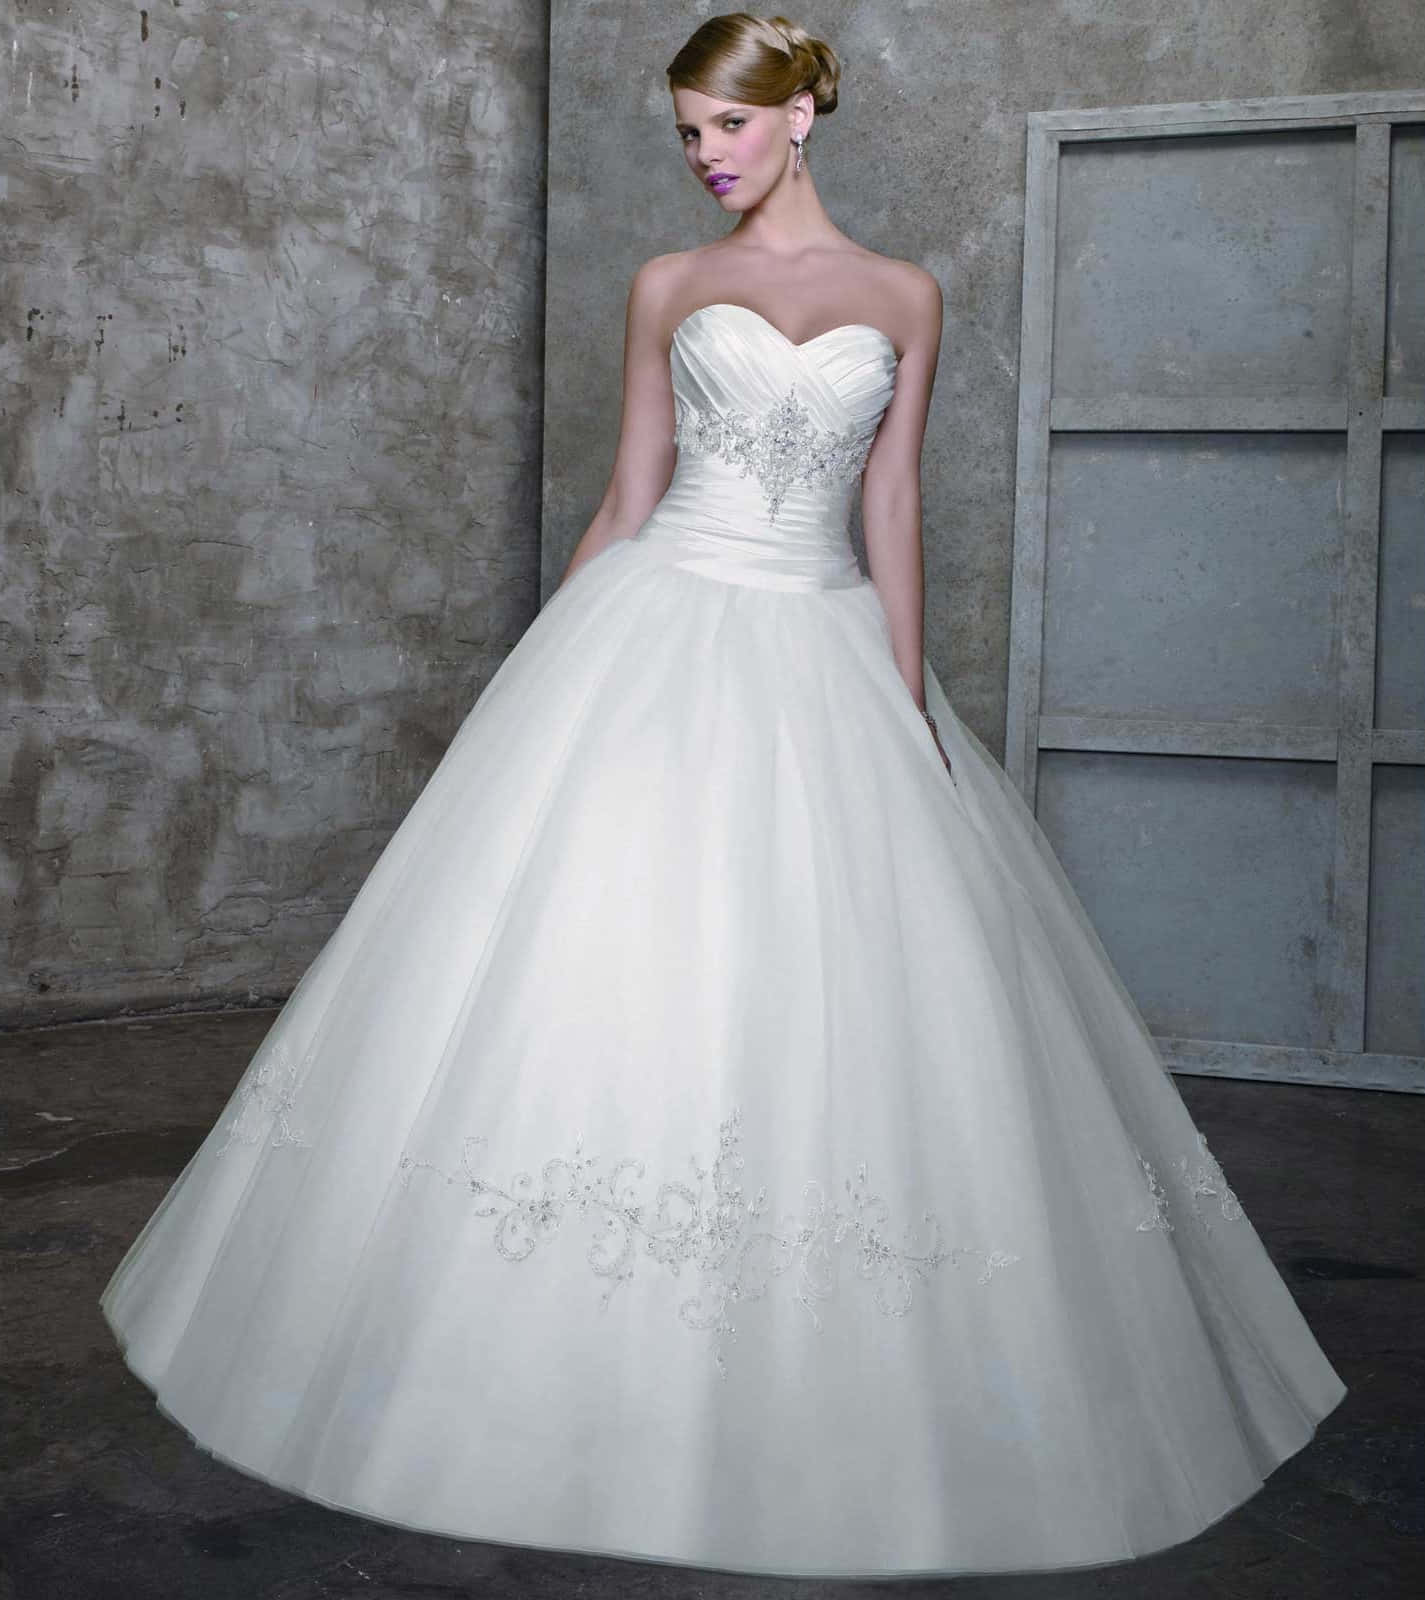 A beautiful, strapless wedding gown that will make any bride feel like a princess on her special day.